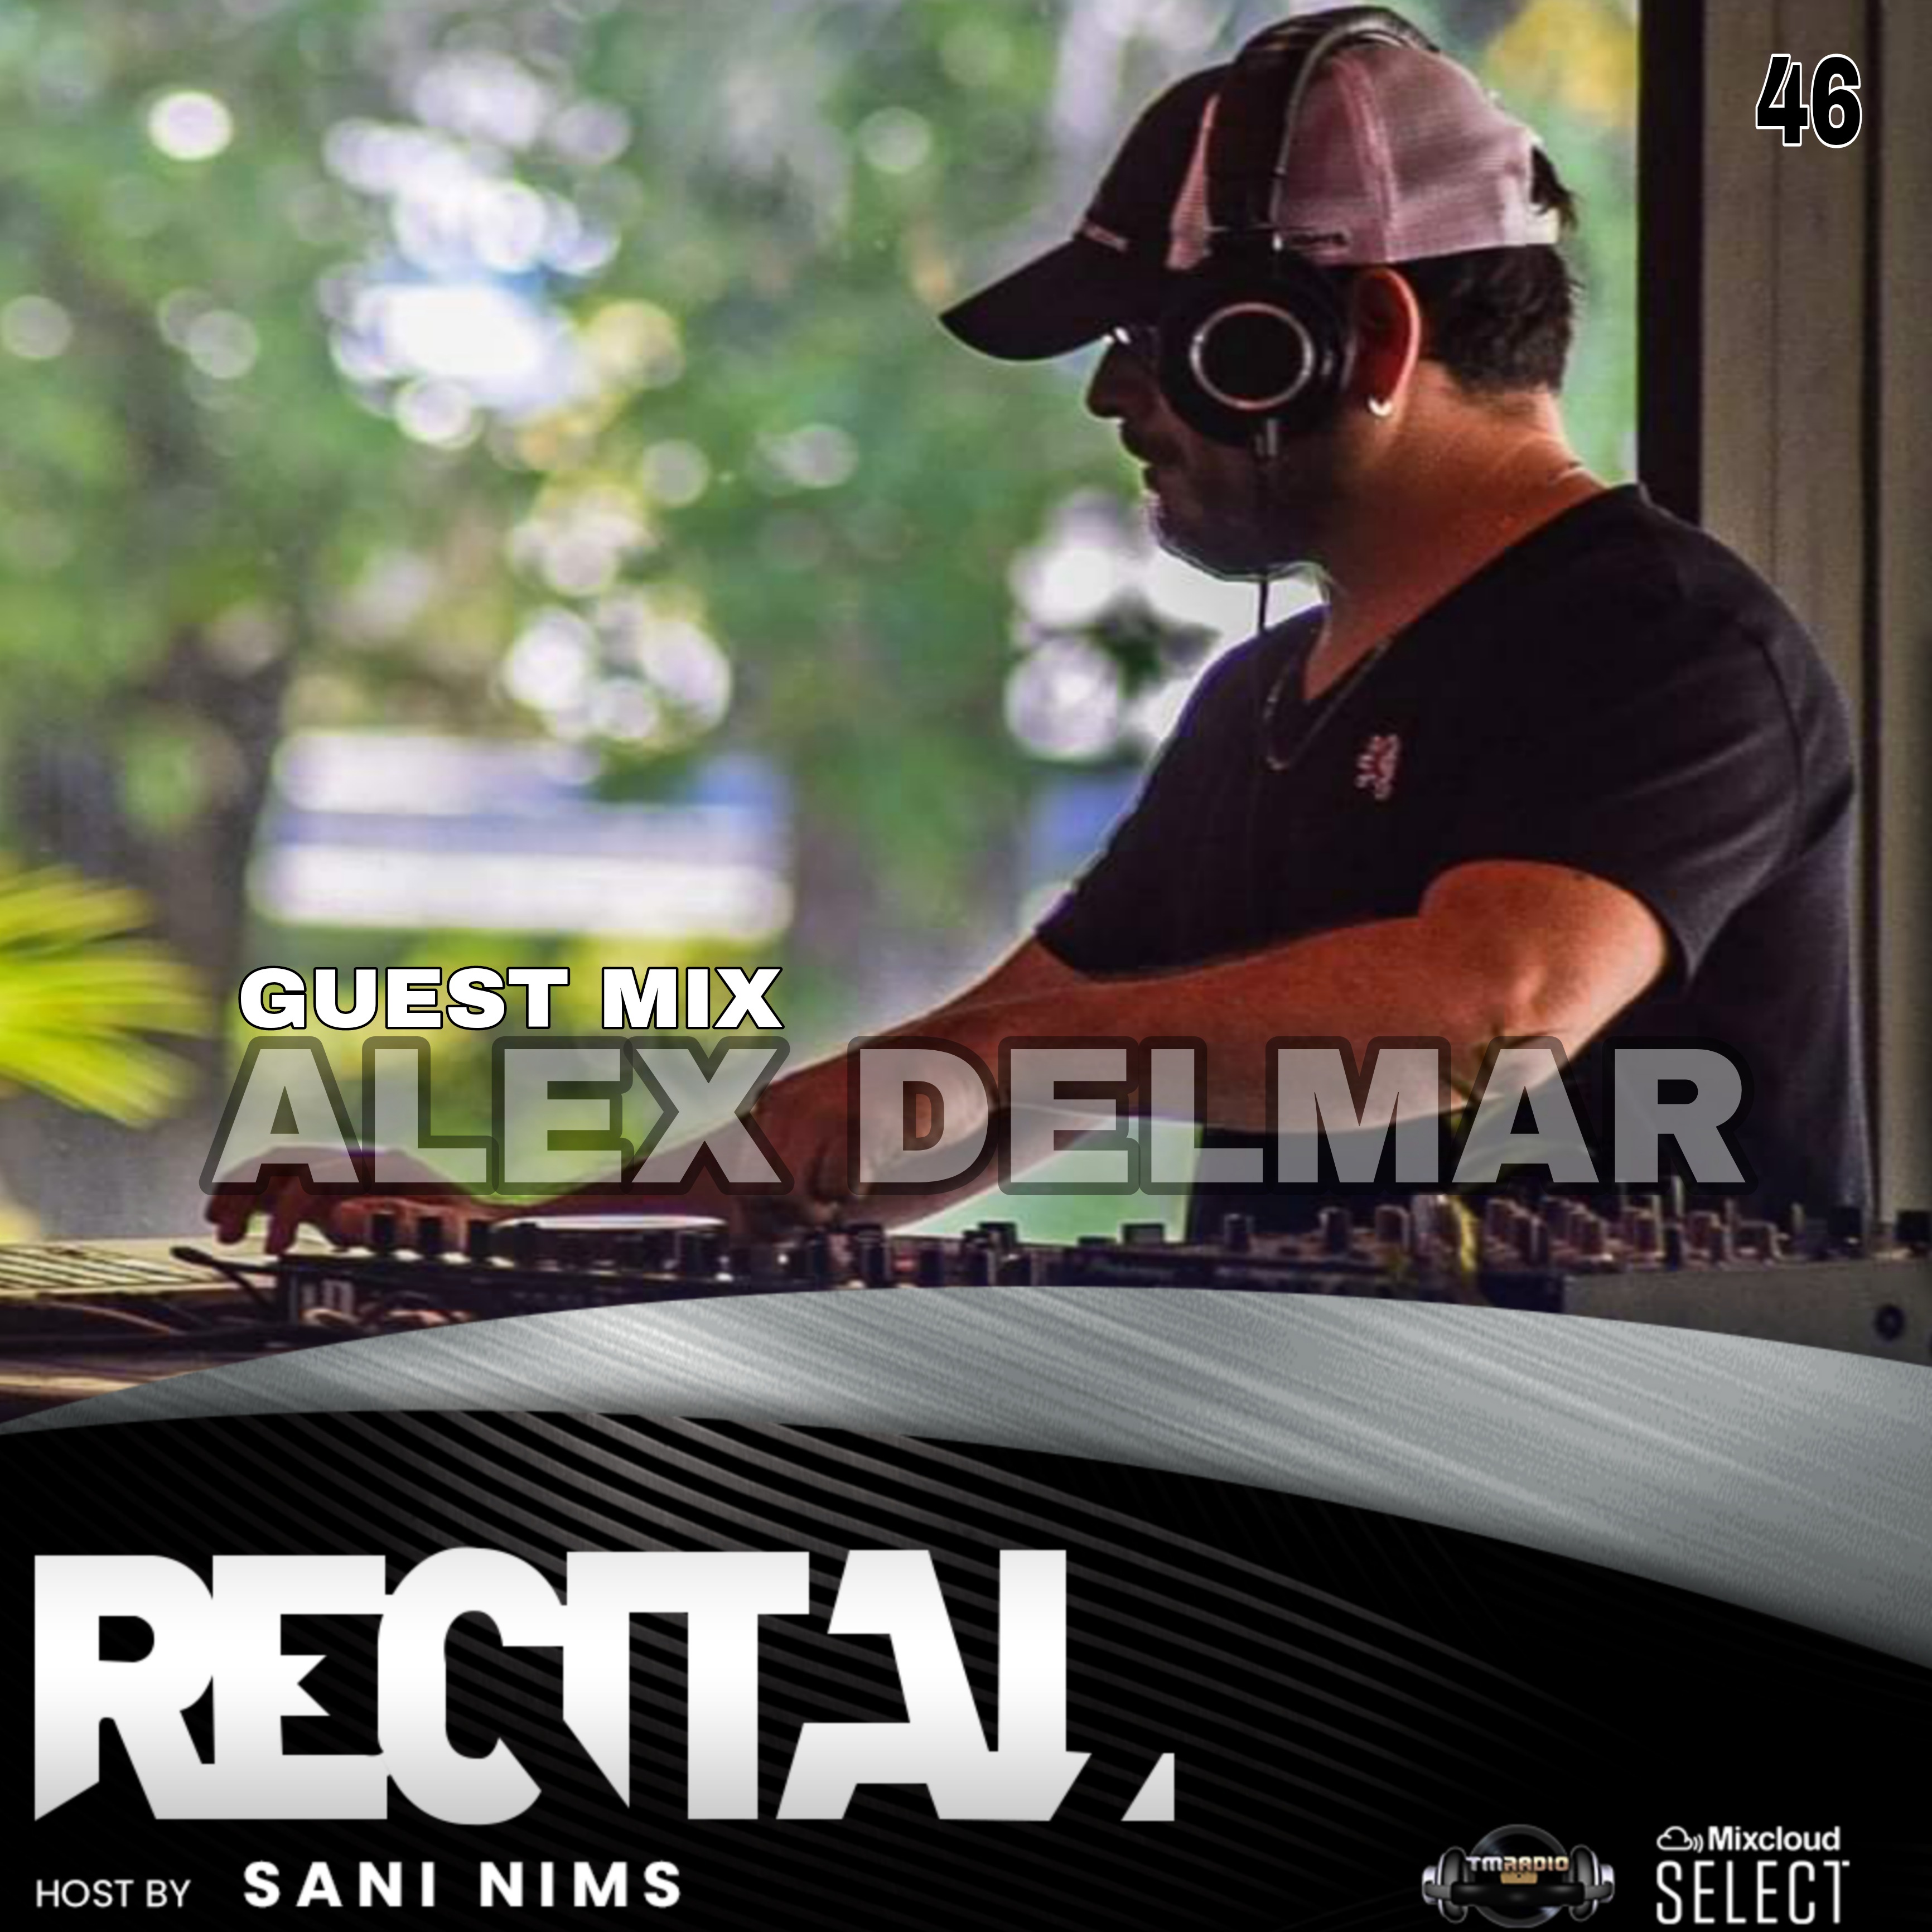 Recital :: RECITAL RADIO SHOW EP 46 GUEST MIX BY ALEX DELMAR ON TM RADIO HOST BY SANI NIMS (aired on February 6th) banner logo